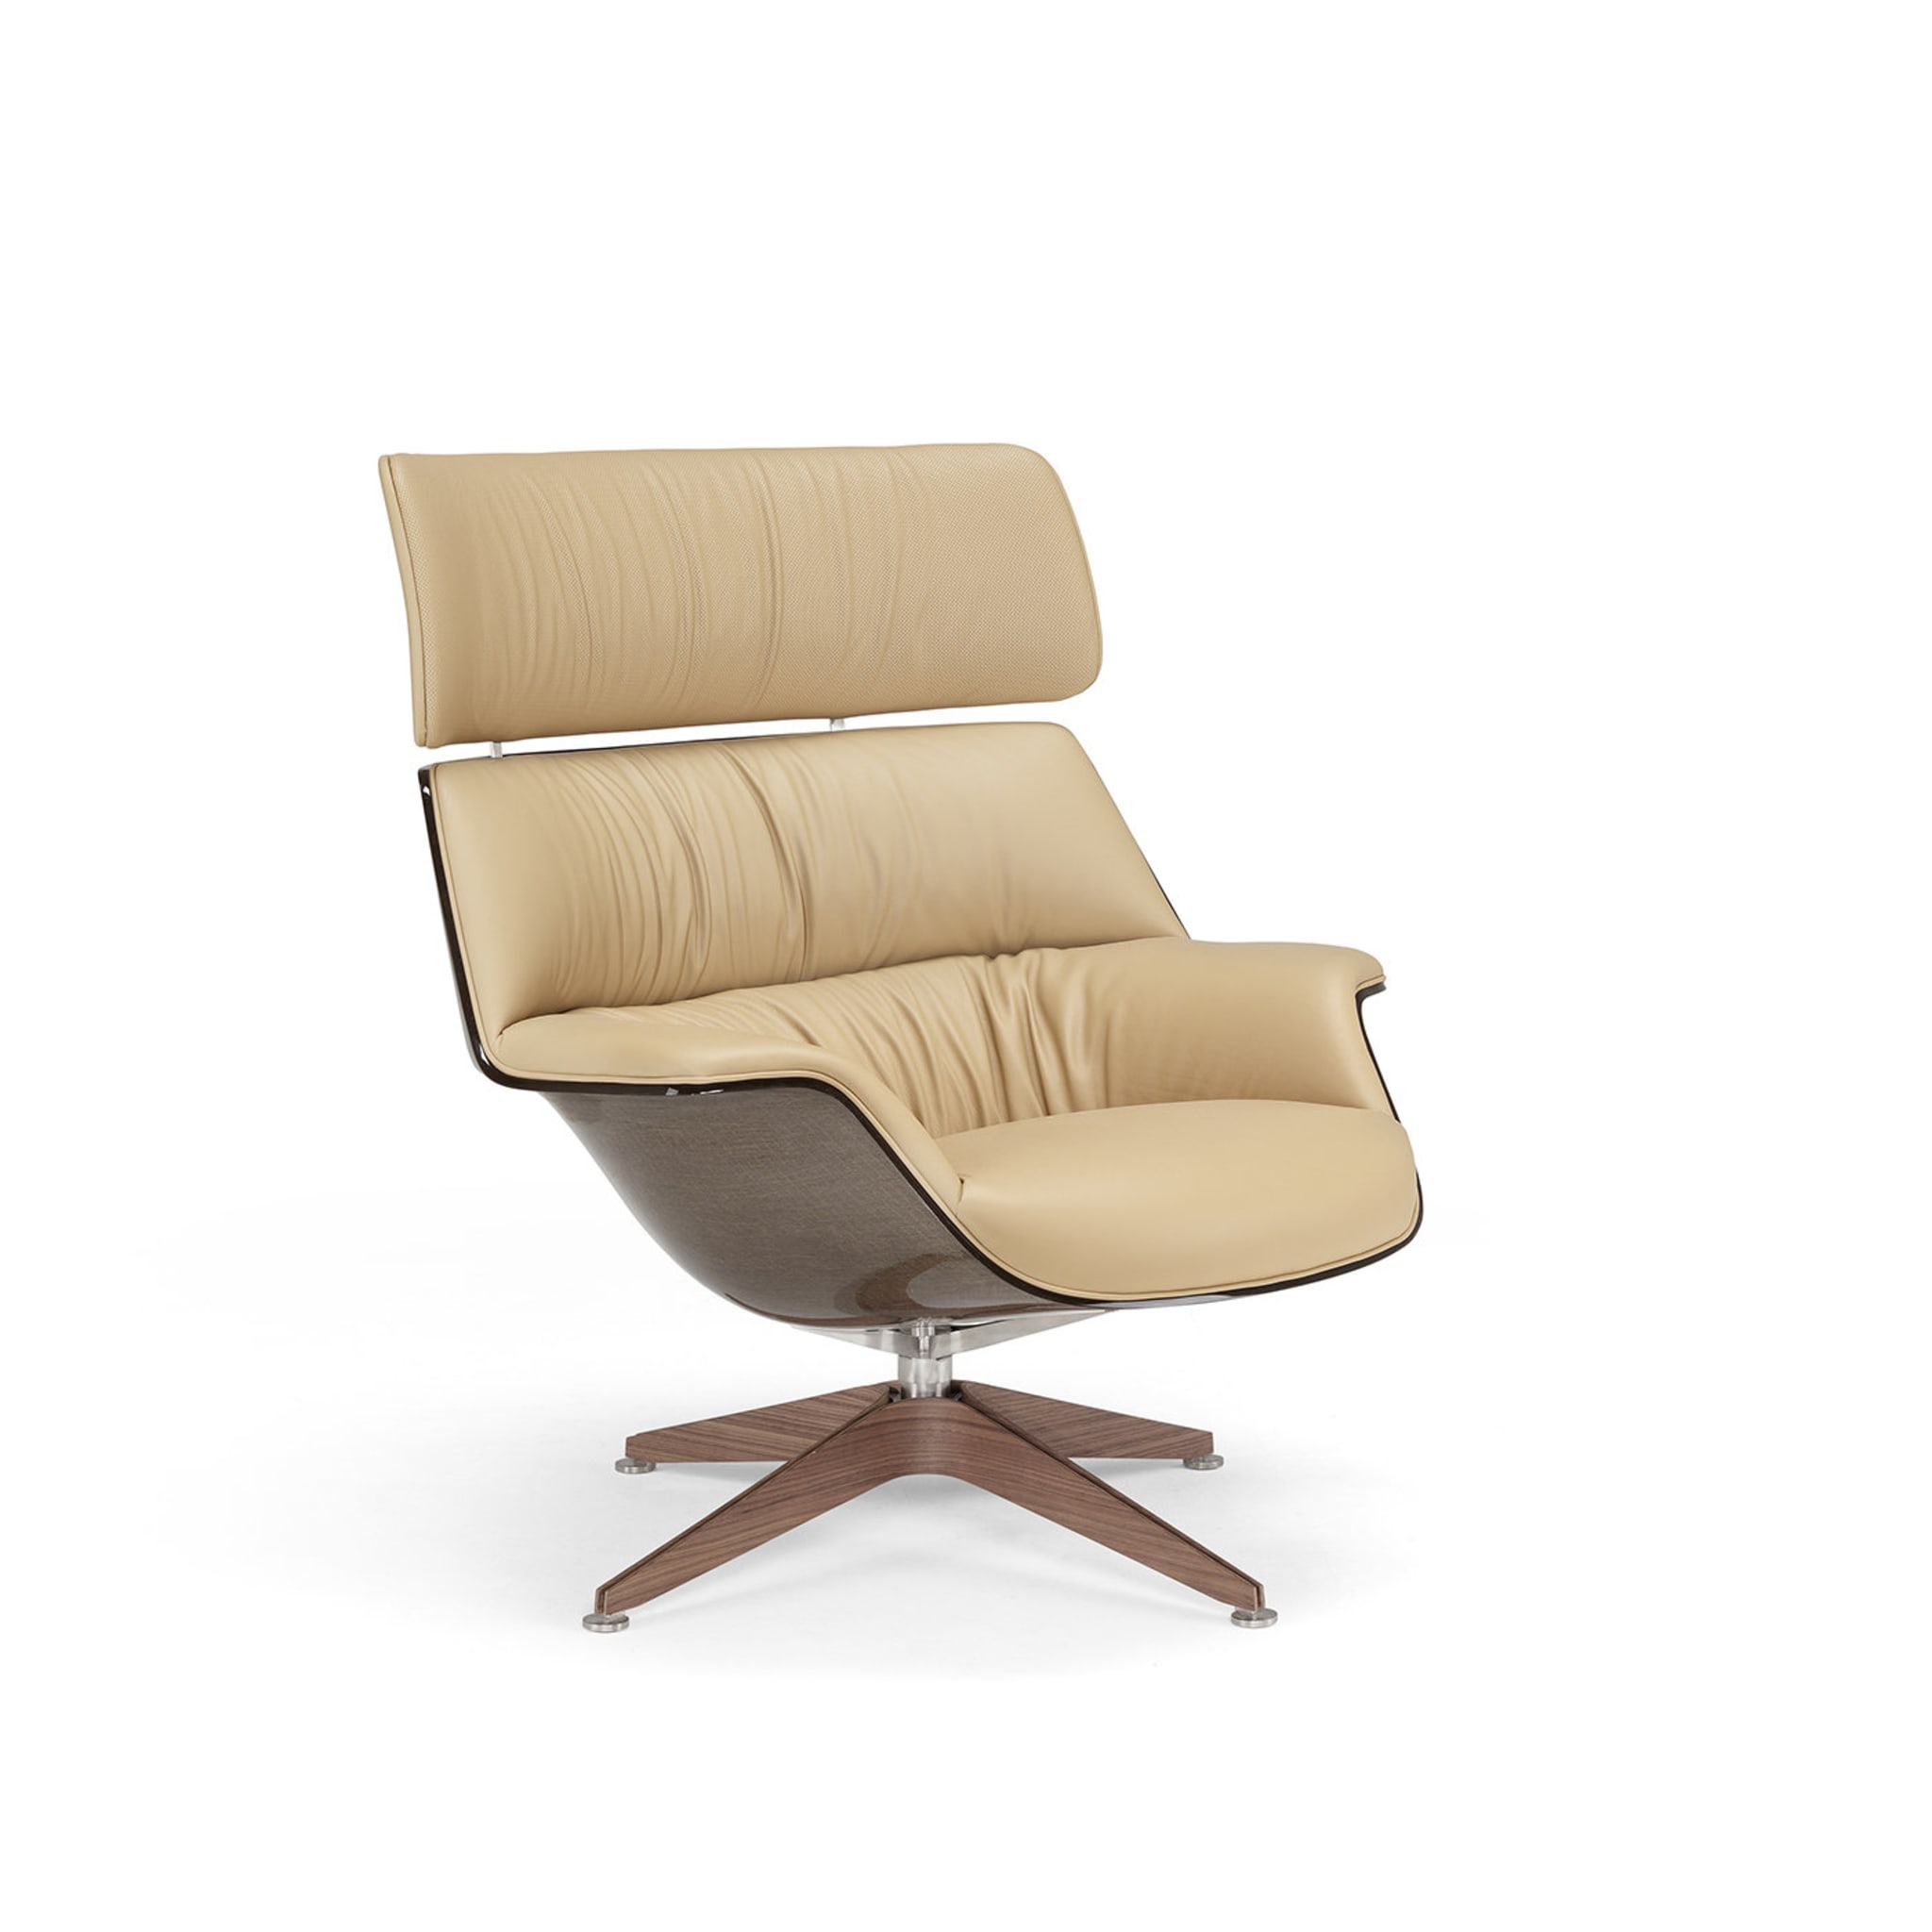 Saintluc Coach Lounge Chair and Pouf by Jean-Marie Massaud - Alternative view 2